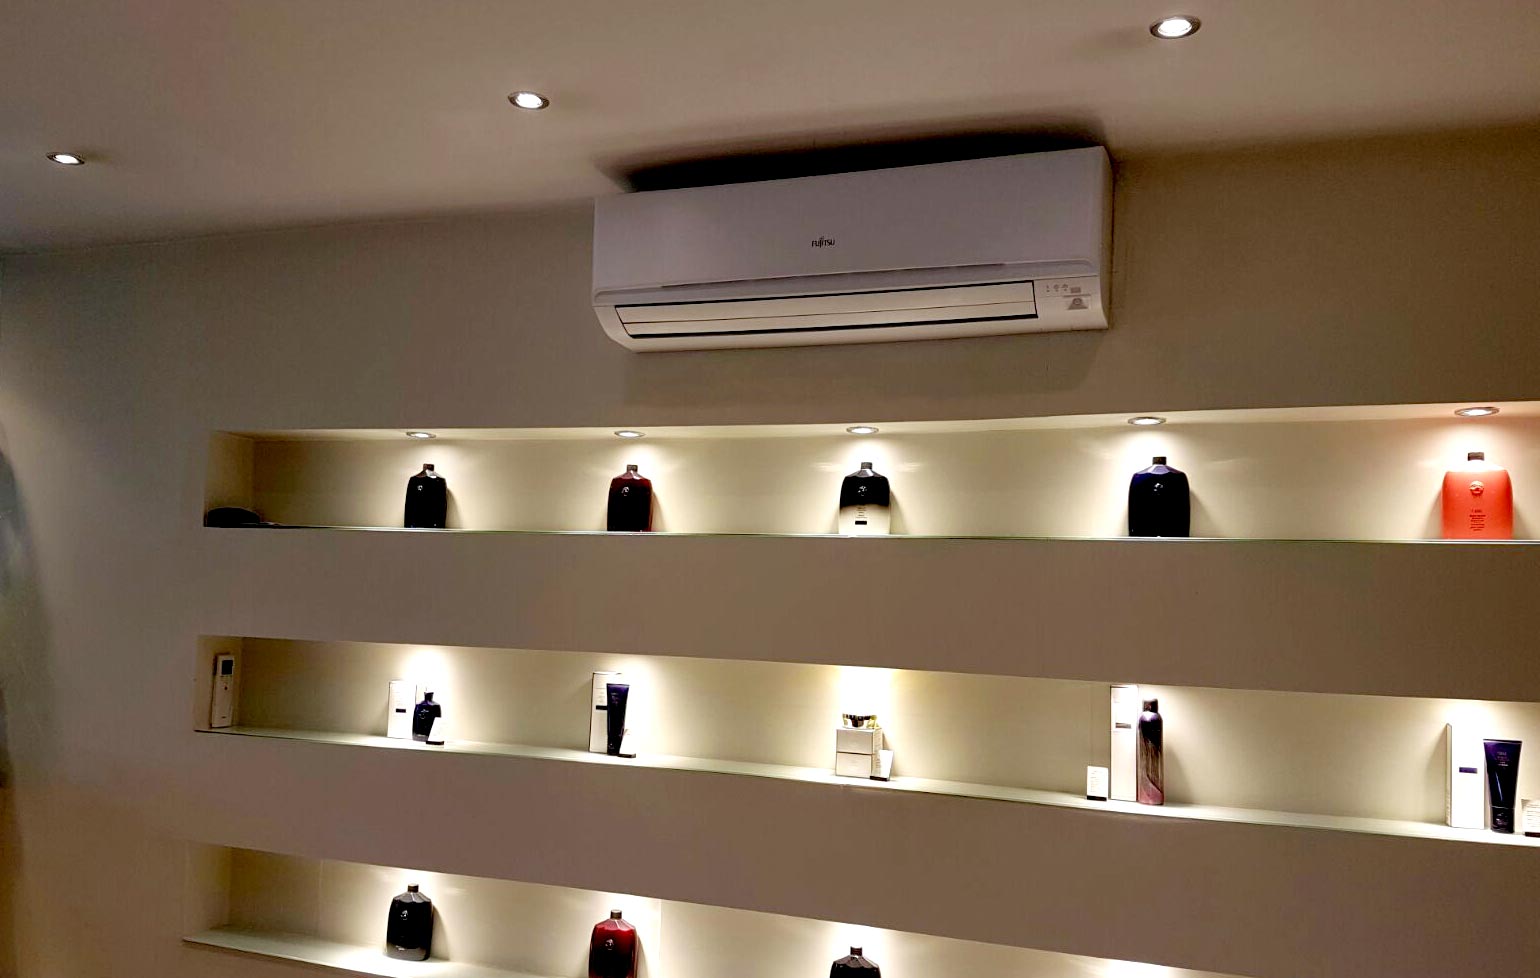 Keep Cool With Professional Air Conditioning Installation